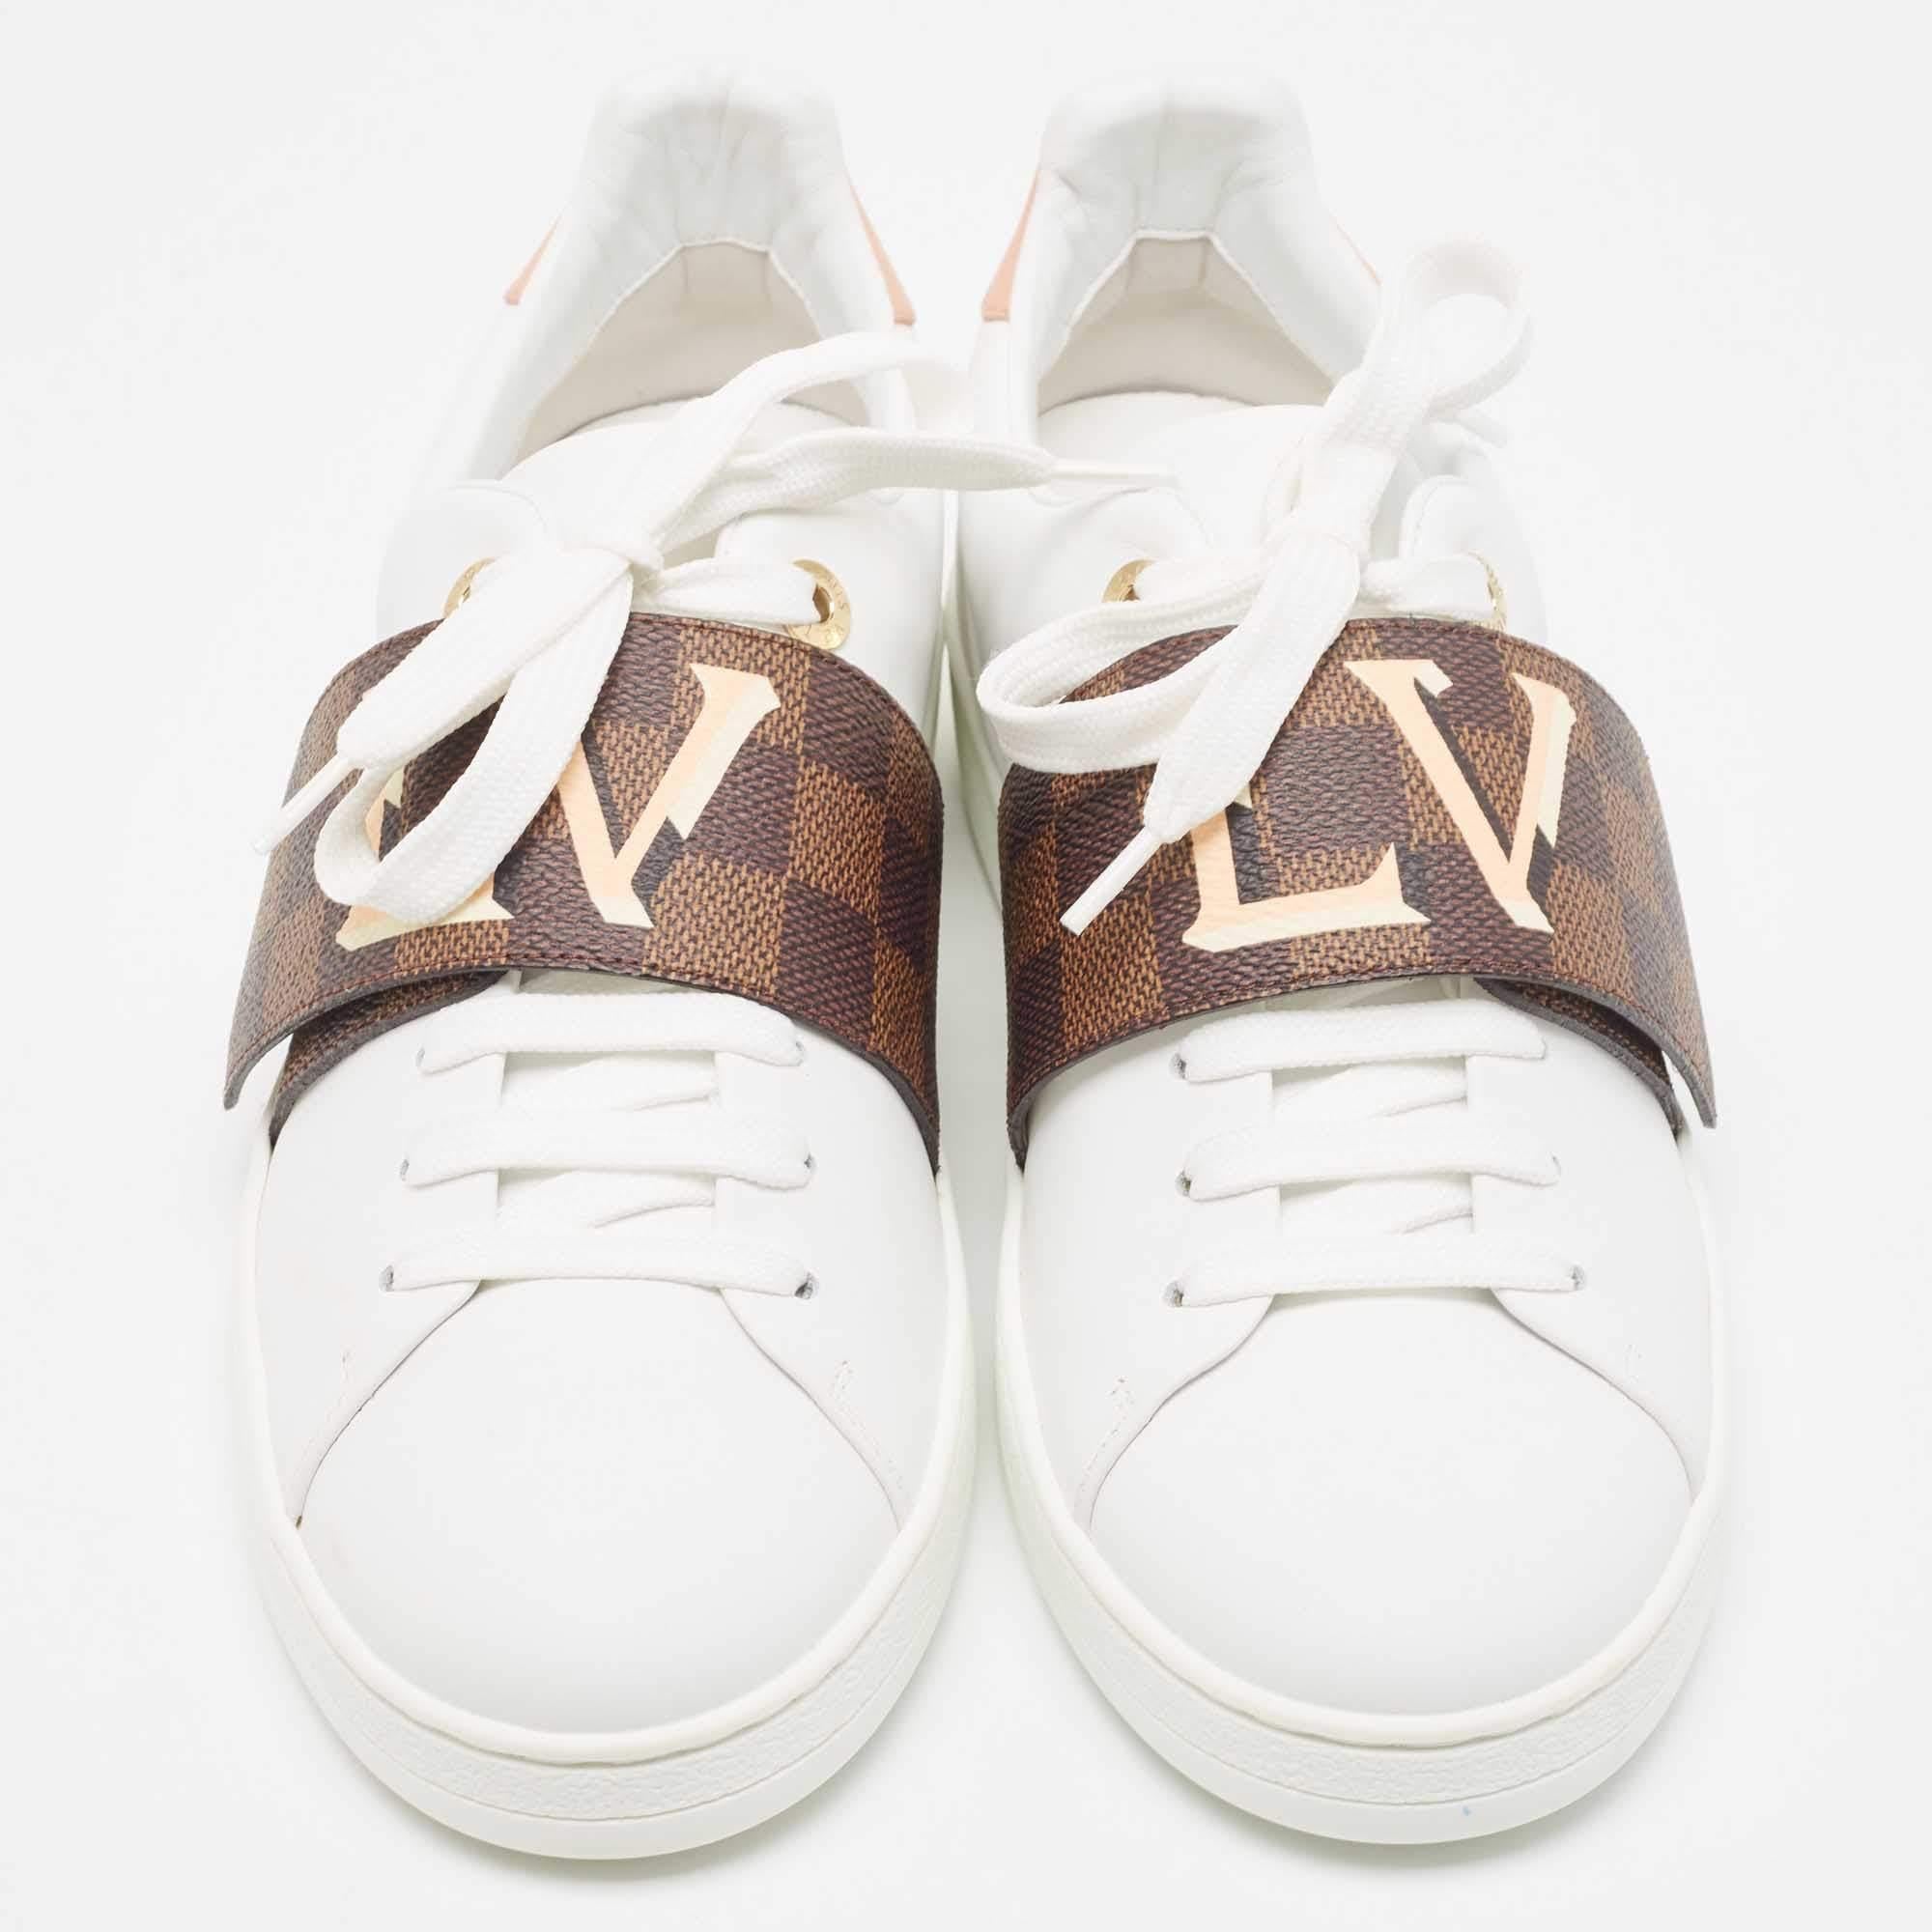 A great way to elevate your casual look, these white sneakers from Louis Vuitton feature a contrasting velcro strap over the lace-up vamps. The brand name vamps adds a luxe touch to the design.

Includes
Original Dustbag, Lace